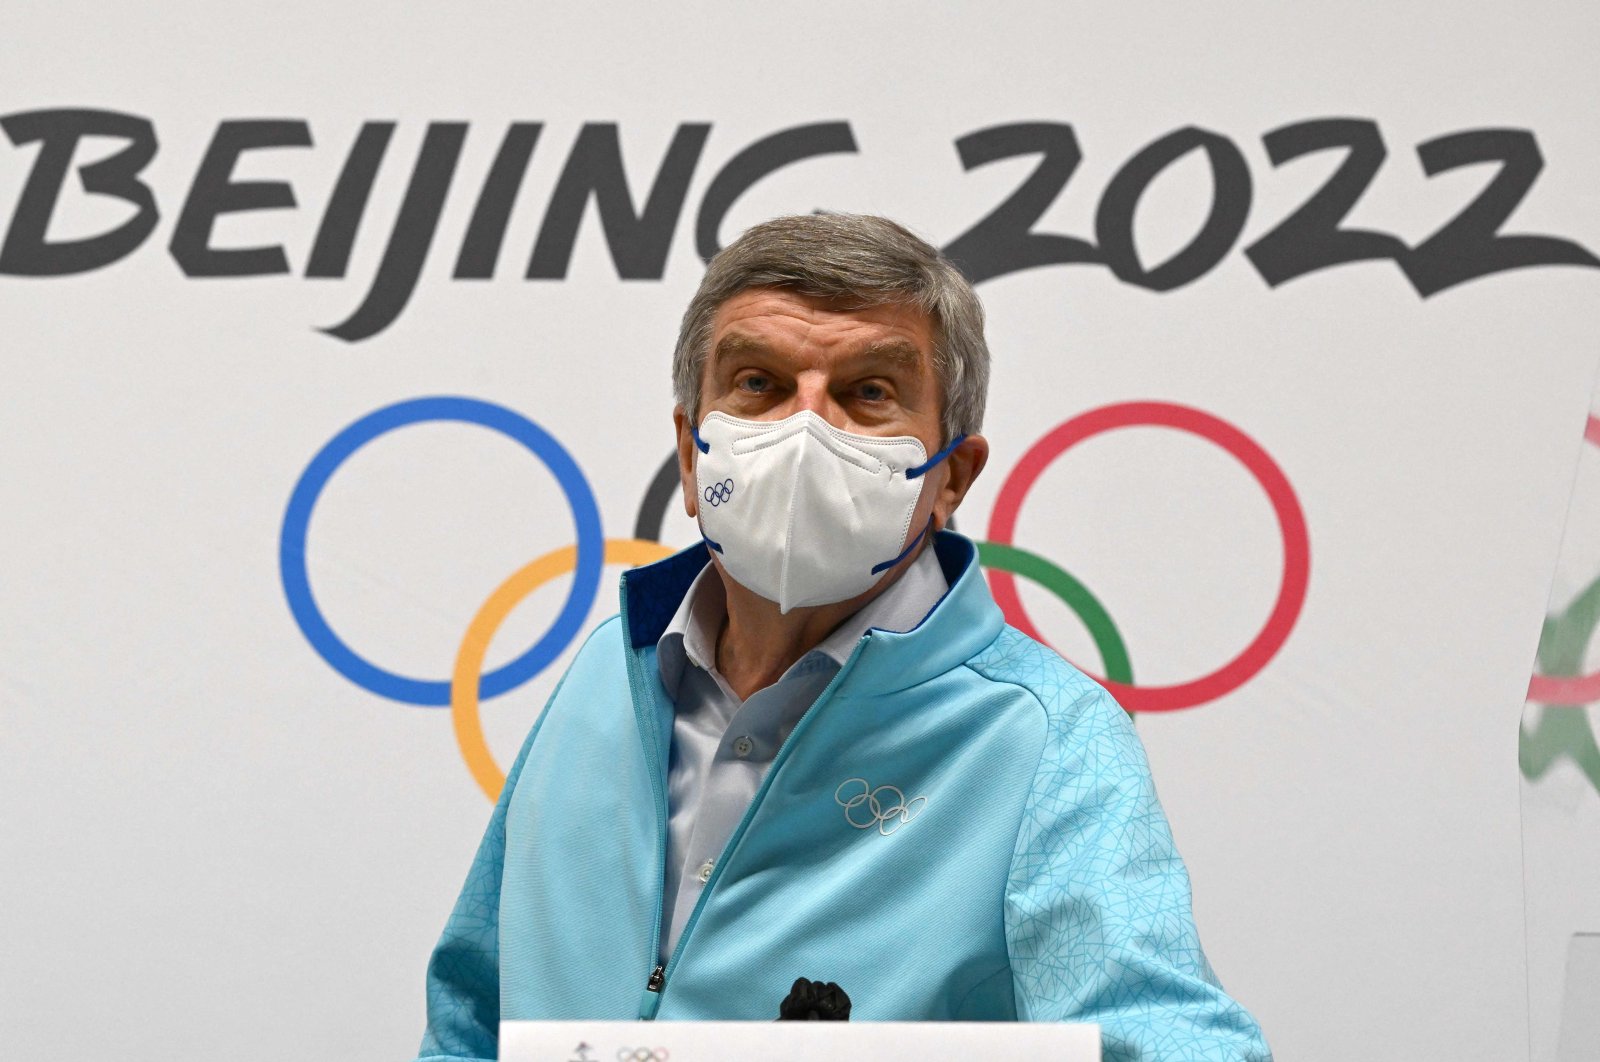 International Olympic Committee (IOC) President Thomas Bach addresses journalists during a press conference at the Main Media Center, Beijing, China, Feb. 18, 2022. (AFP Photo)